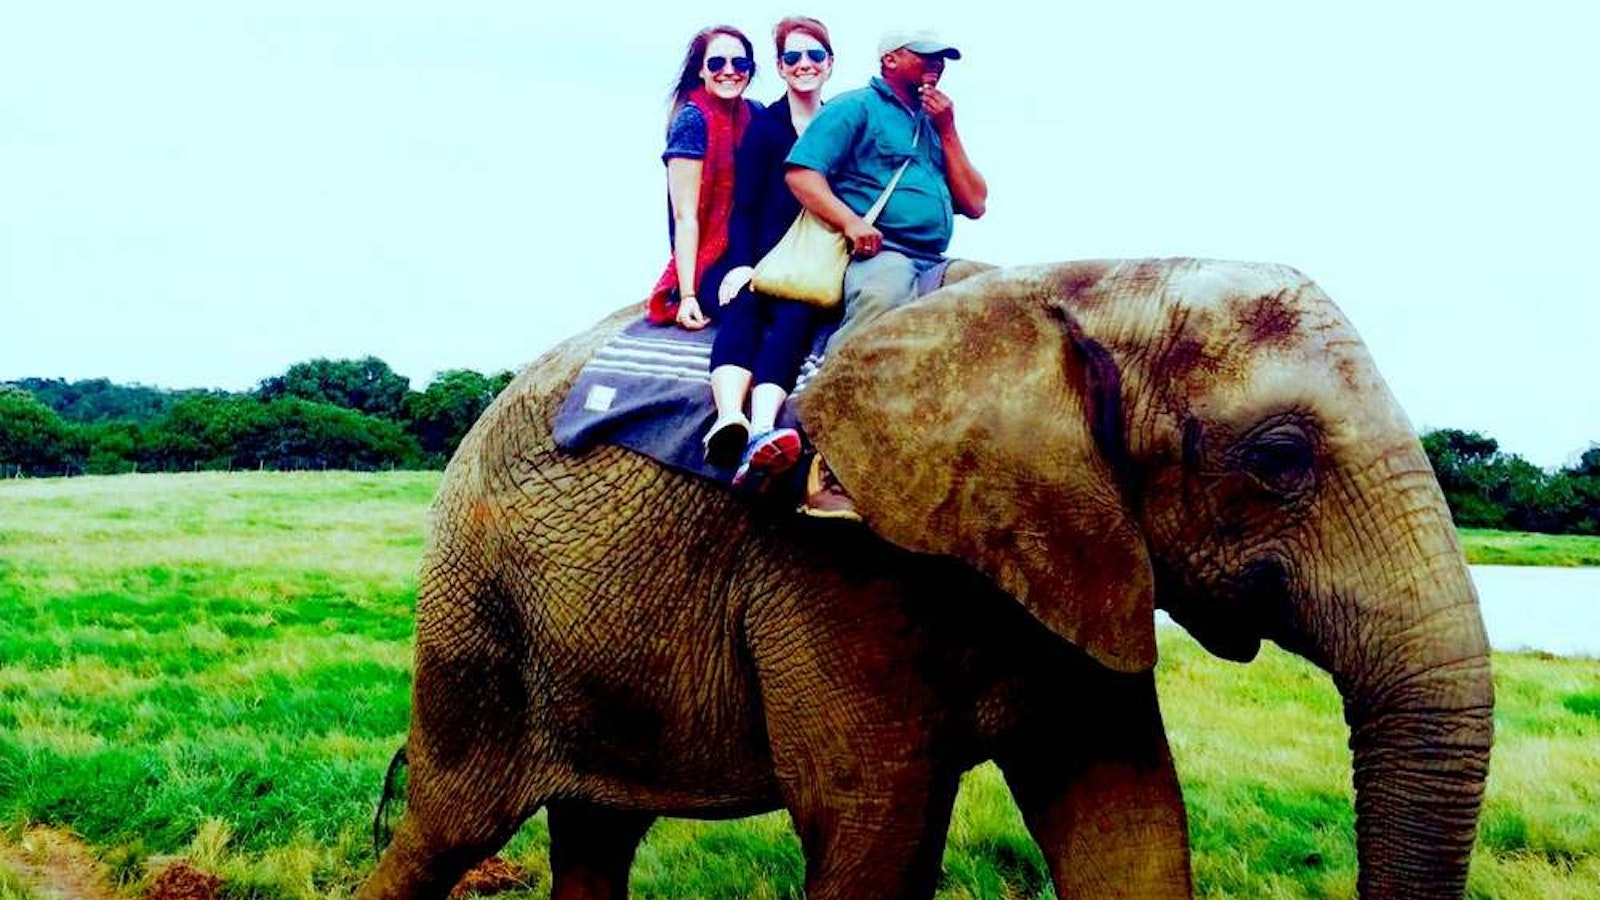 Riding an elephant in South Africa